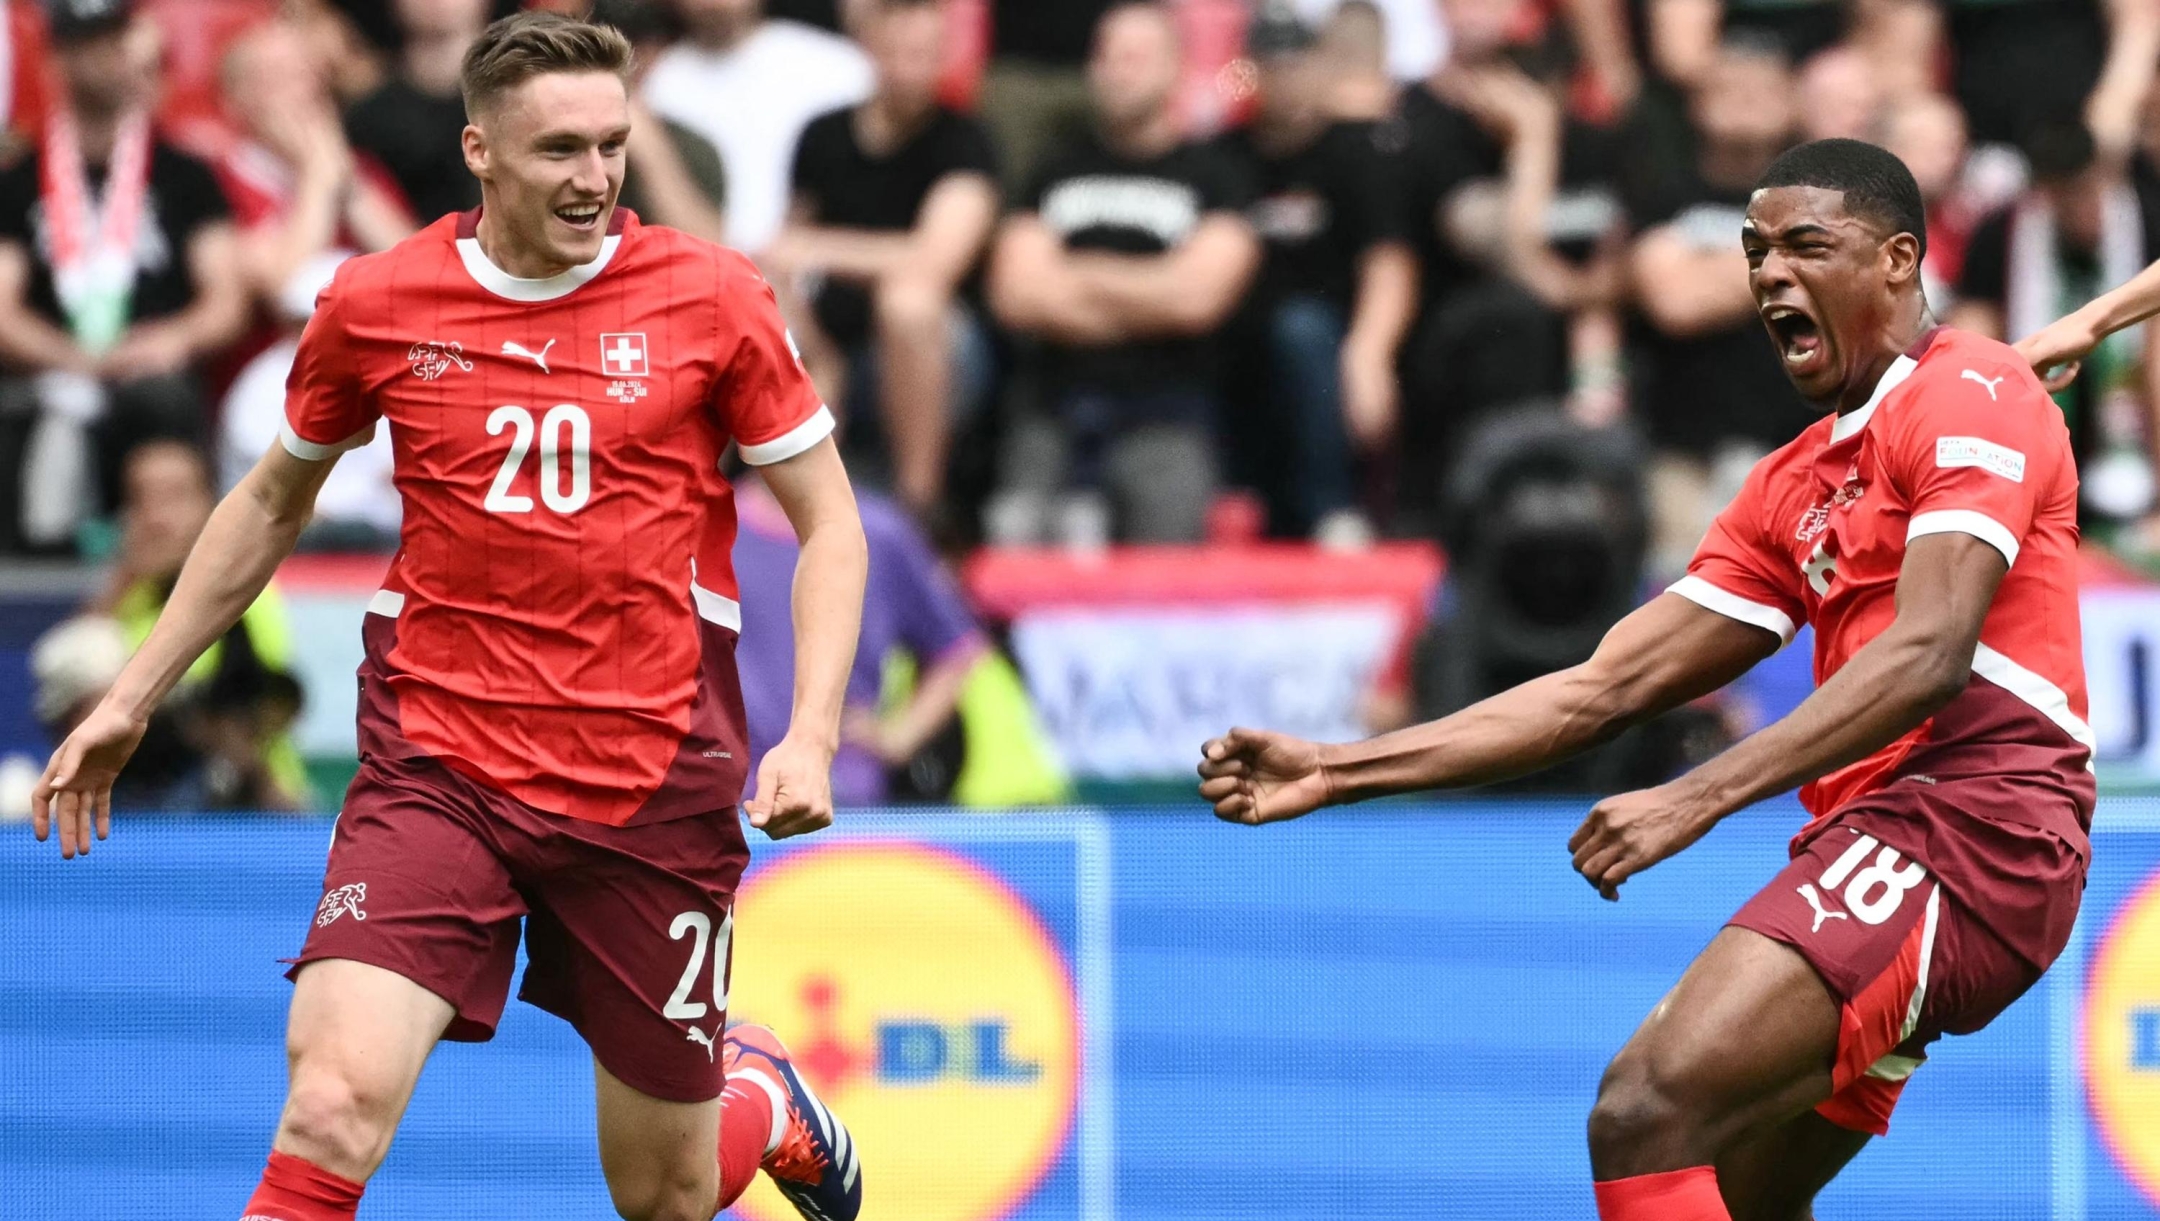 Switzerland's forward #18 Kwadwo Duah celebrates scoring the opening goal with his teammate Switzerland's midfielder #20 Michel Aebischer during the UEFA Euro 2024 Group A football match between Hungary and Switzerland at the Cologne Stadium in Cologne on June 15, 2024. (Photo by Angelos Tzortzinis / AFP)